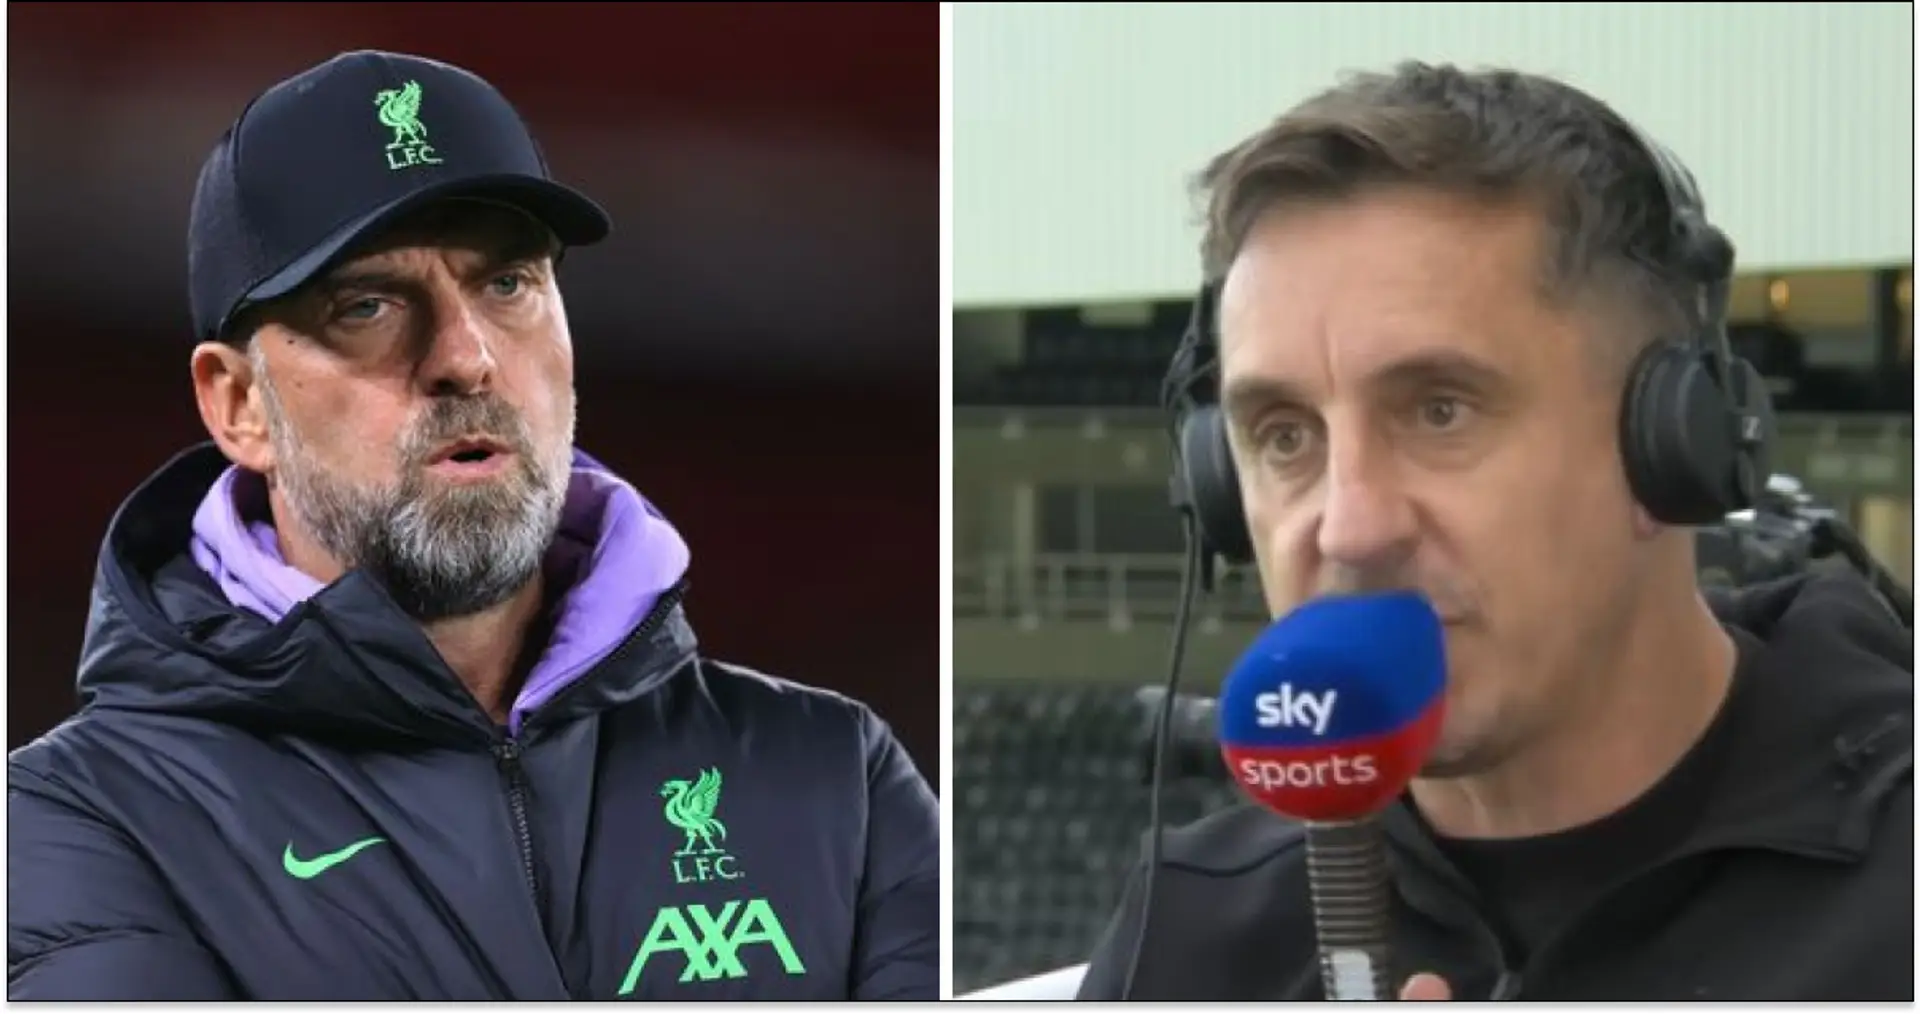 Gary Neville names £100m player Liverpool need to win Premier League title